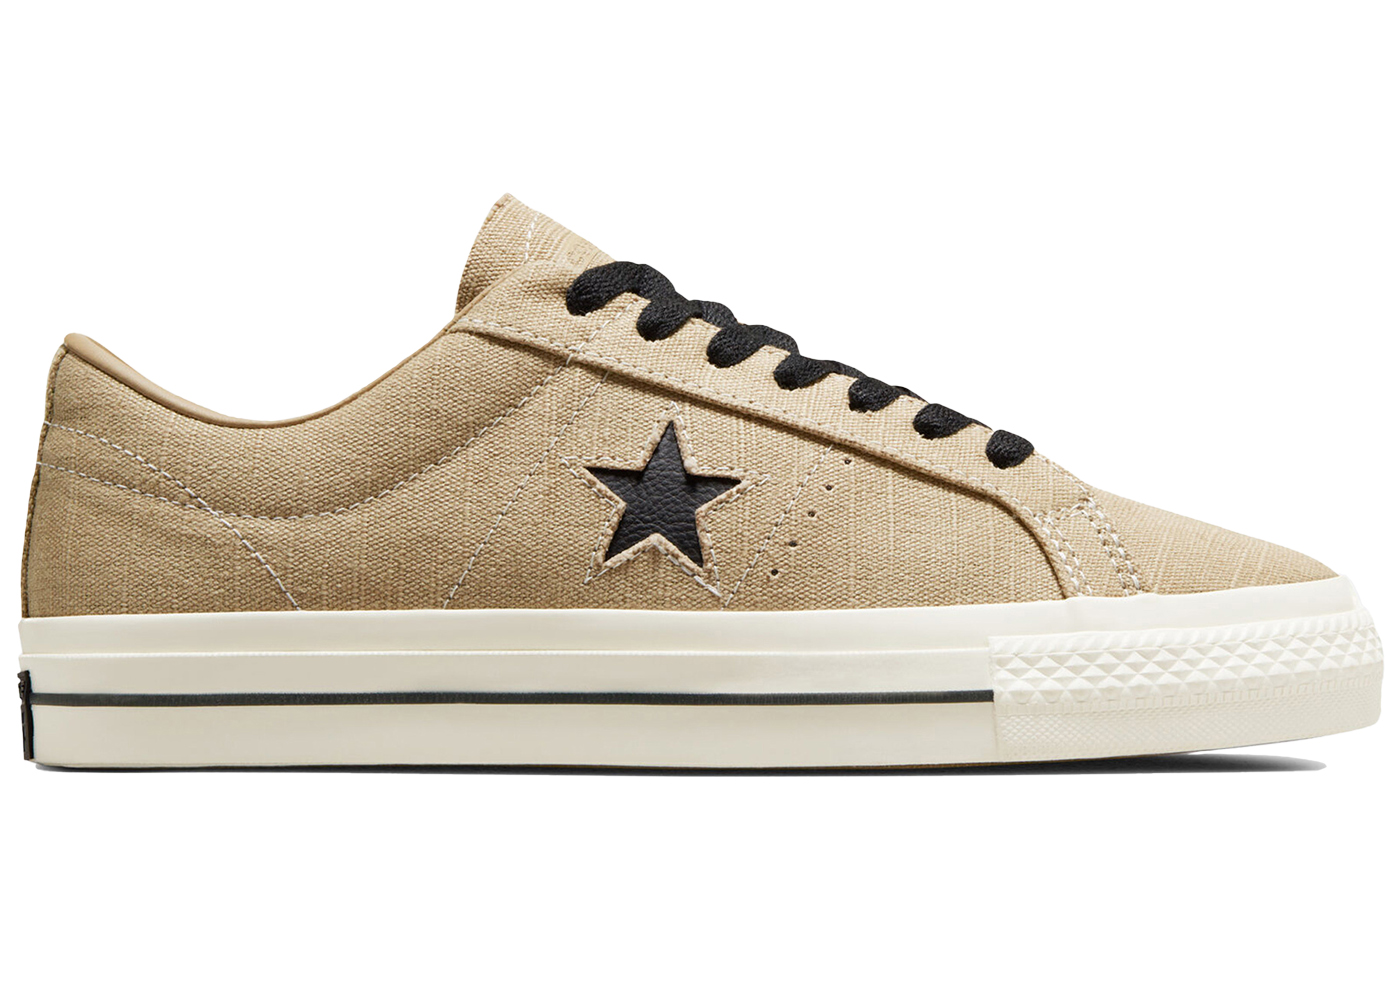 Converse Cons One Star Pro Ox Nomad Khaki メンズ - A04612C - JP